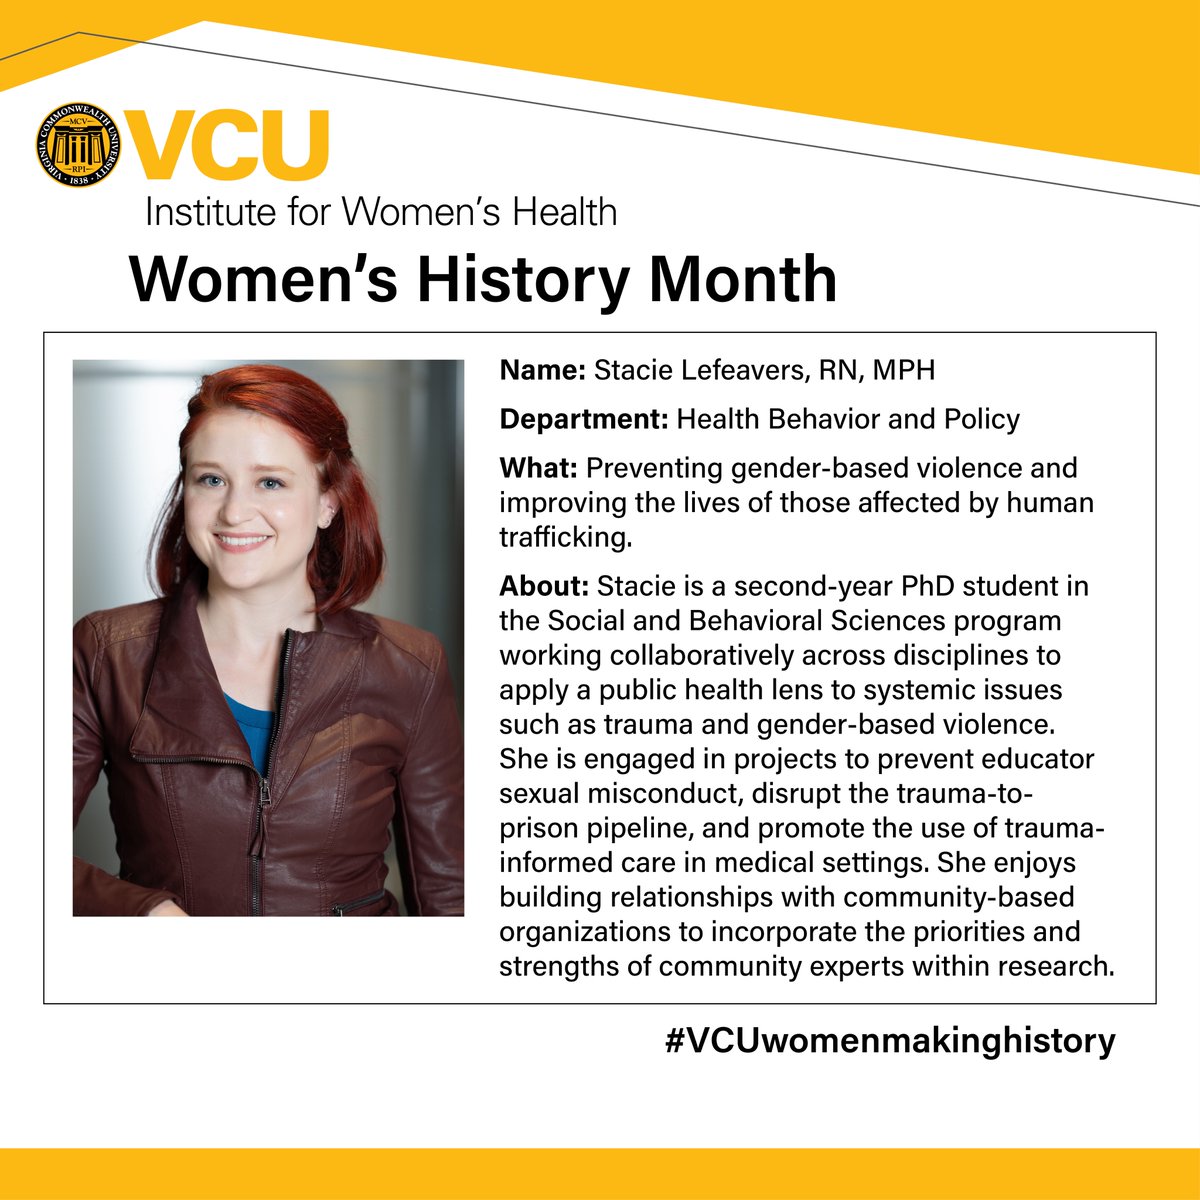 On day 2 of  #WomensHistoryMonth2023 and #VCUwomenmakinghistory we honor @hbp_vcu #doctoralstudent Stacie Lefeavers, whose research focuses on preventing #genderbasedviolence and fighting #humantrafficking. Thank you for inspiring us!